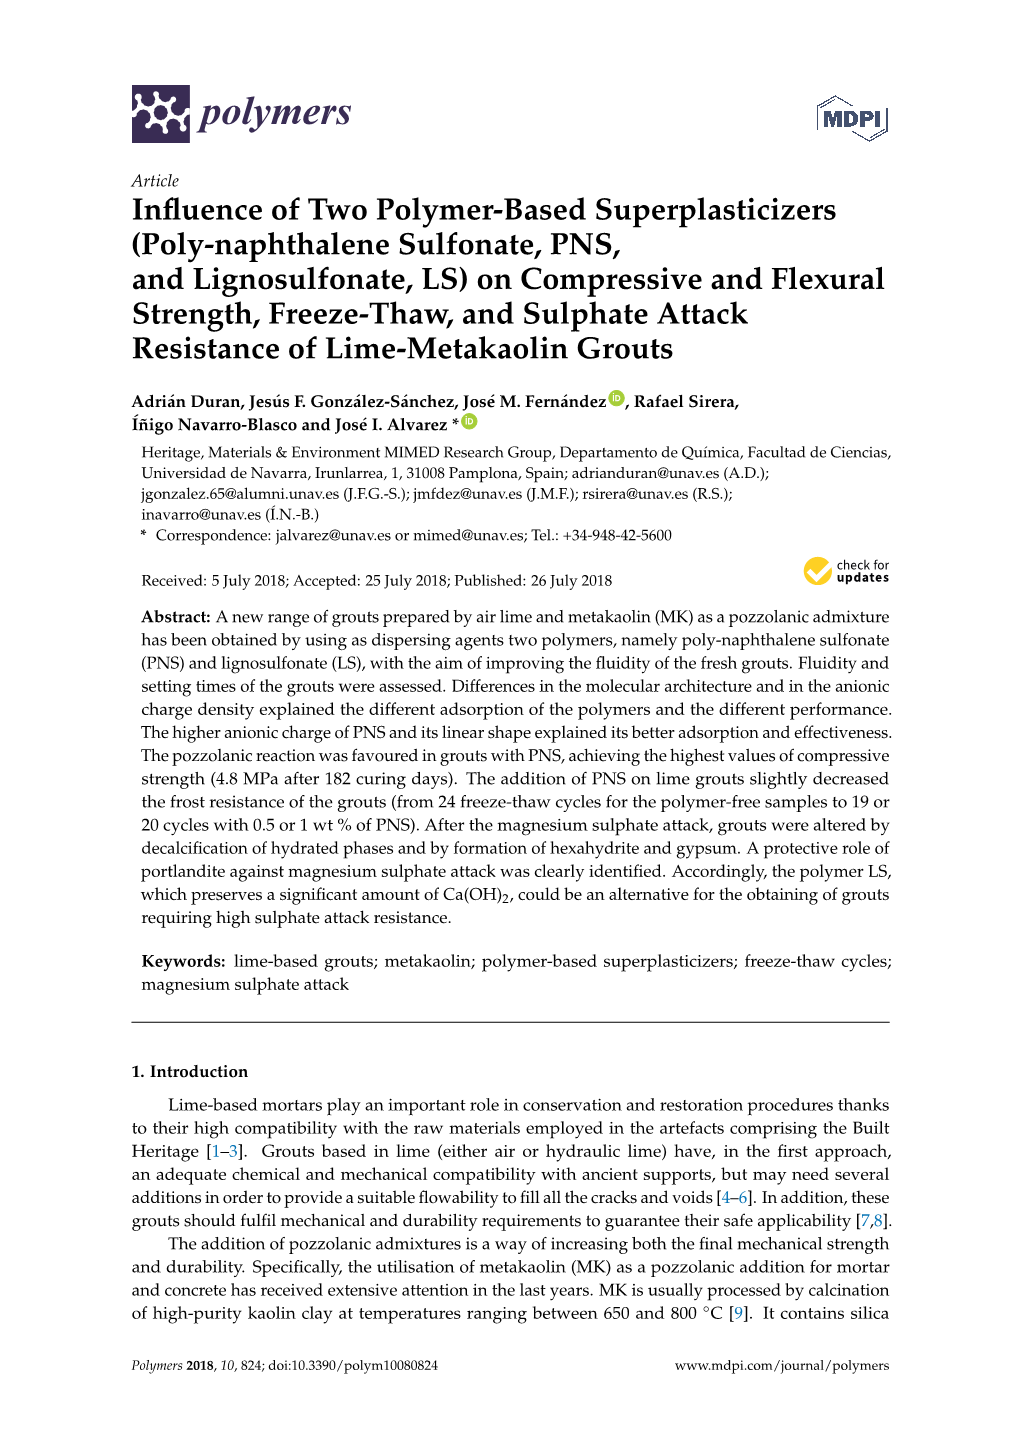 Poly-Naphthalene Sulfonate, PNS, and Lignosulfonate, LS) on Compressive and Flexural Strength, Freeze-Thaw, and Sulphate Attack Resistance of Lime-Metakaolin Grouts